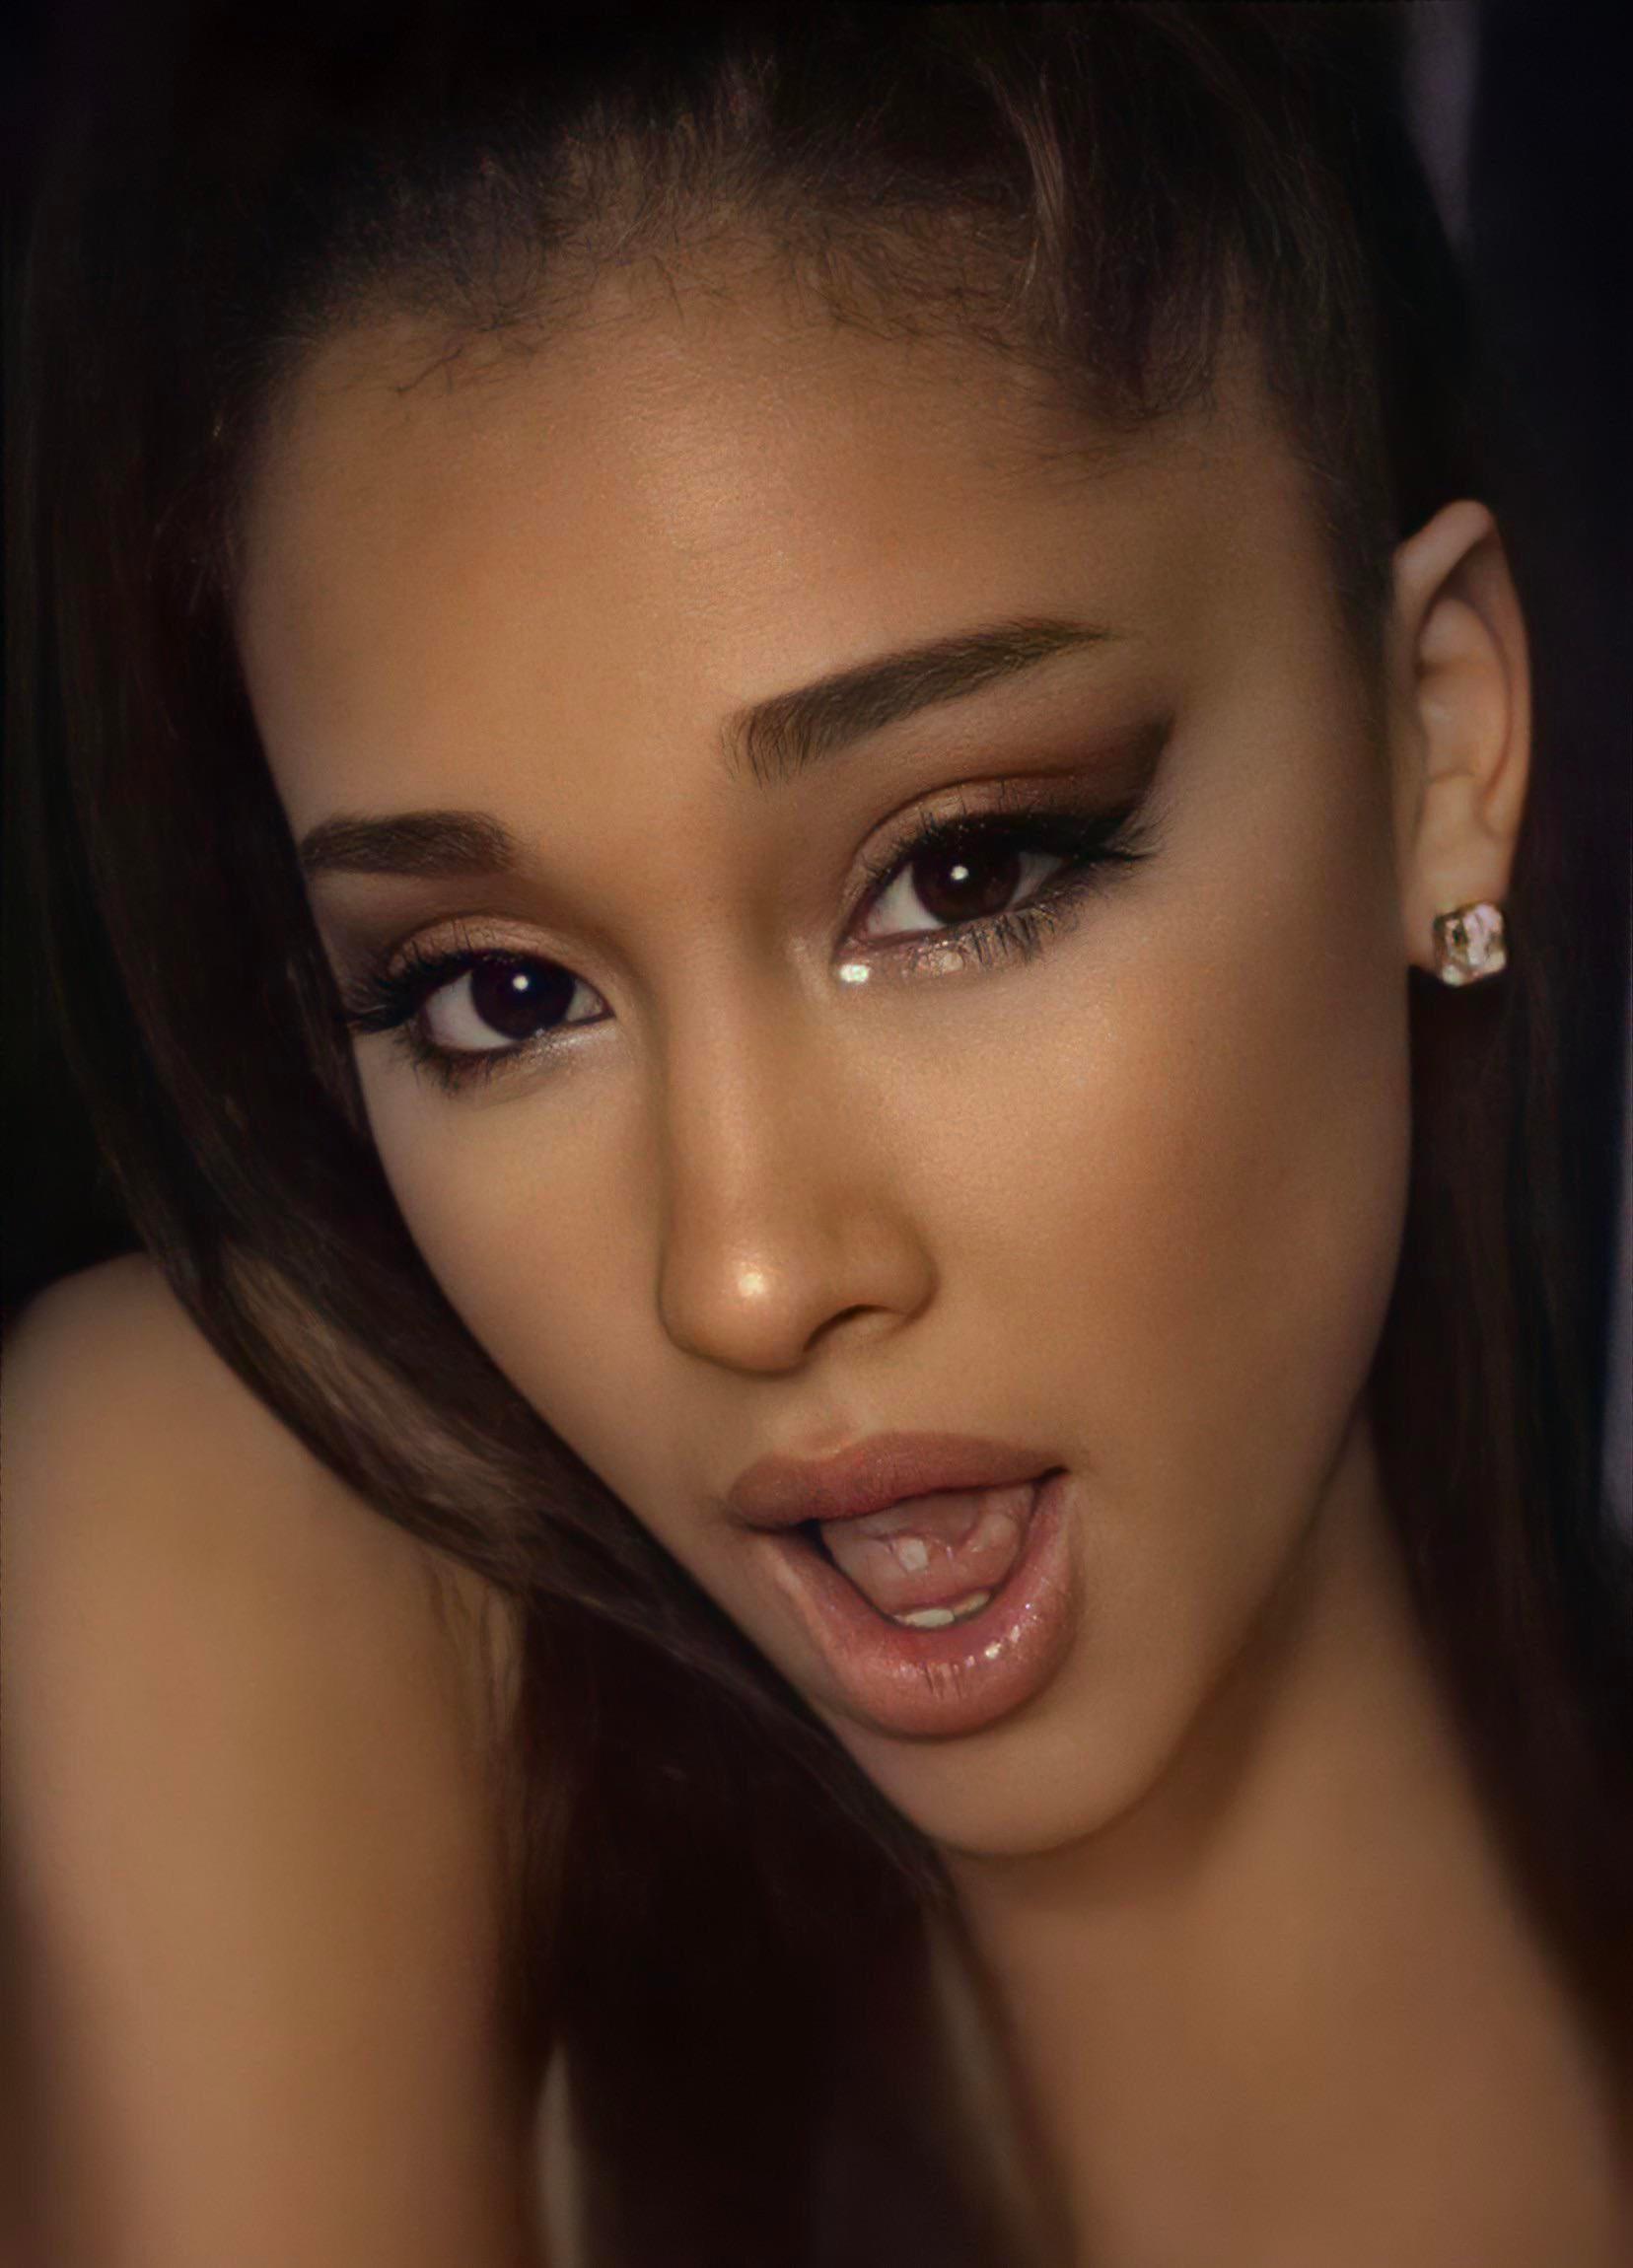 Already leaking just from looking at Ariana Grandes face